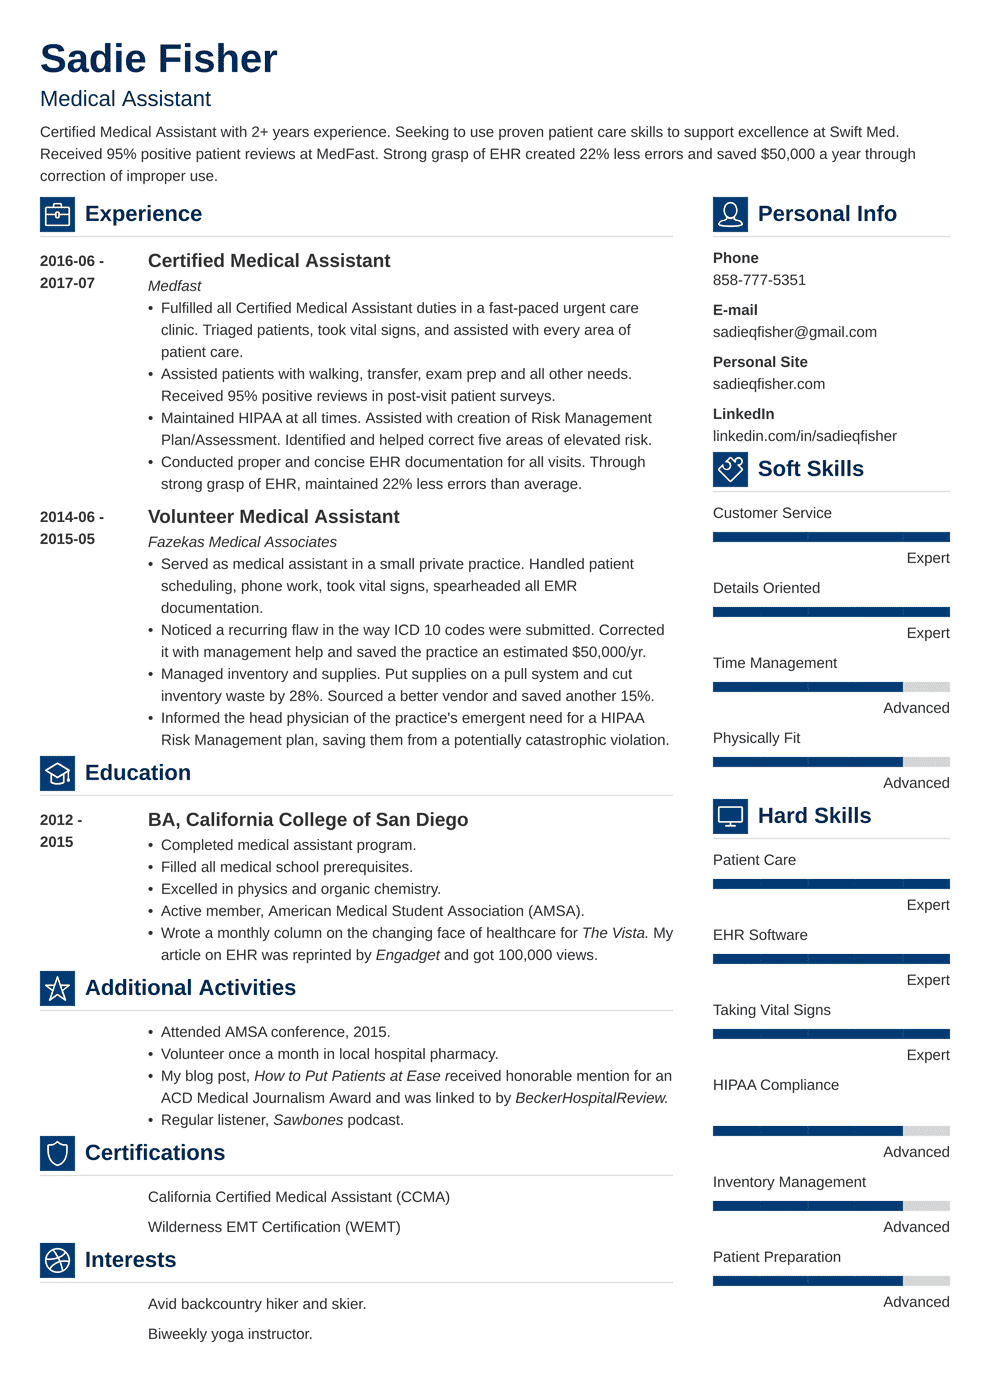 Medical Assistant Resume Template from cdn-images.zety.com